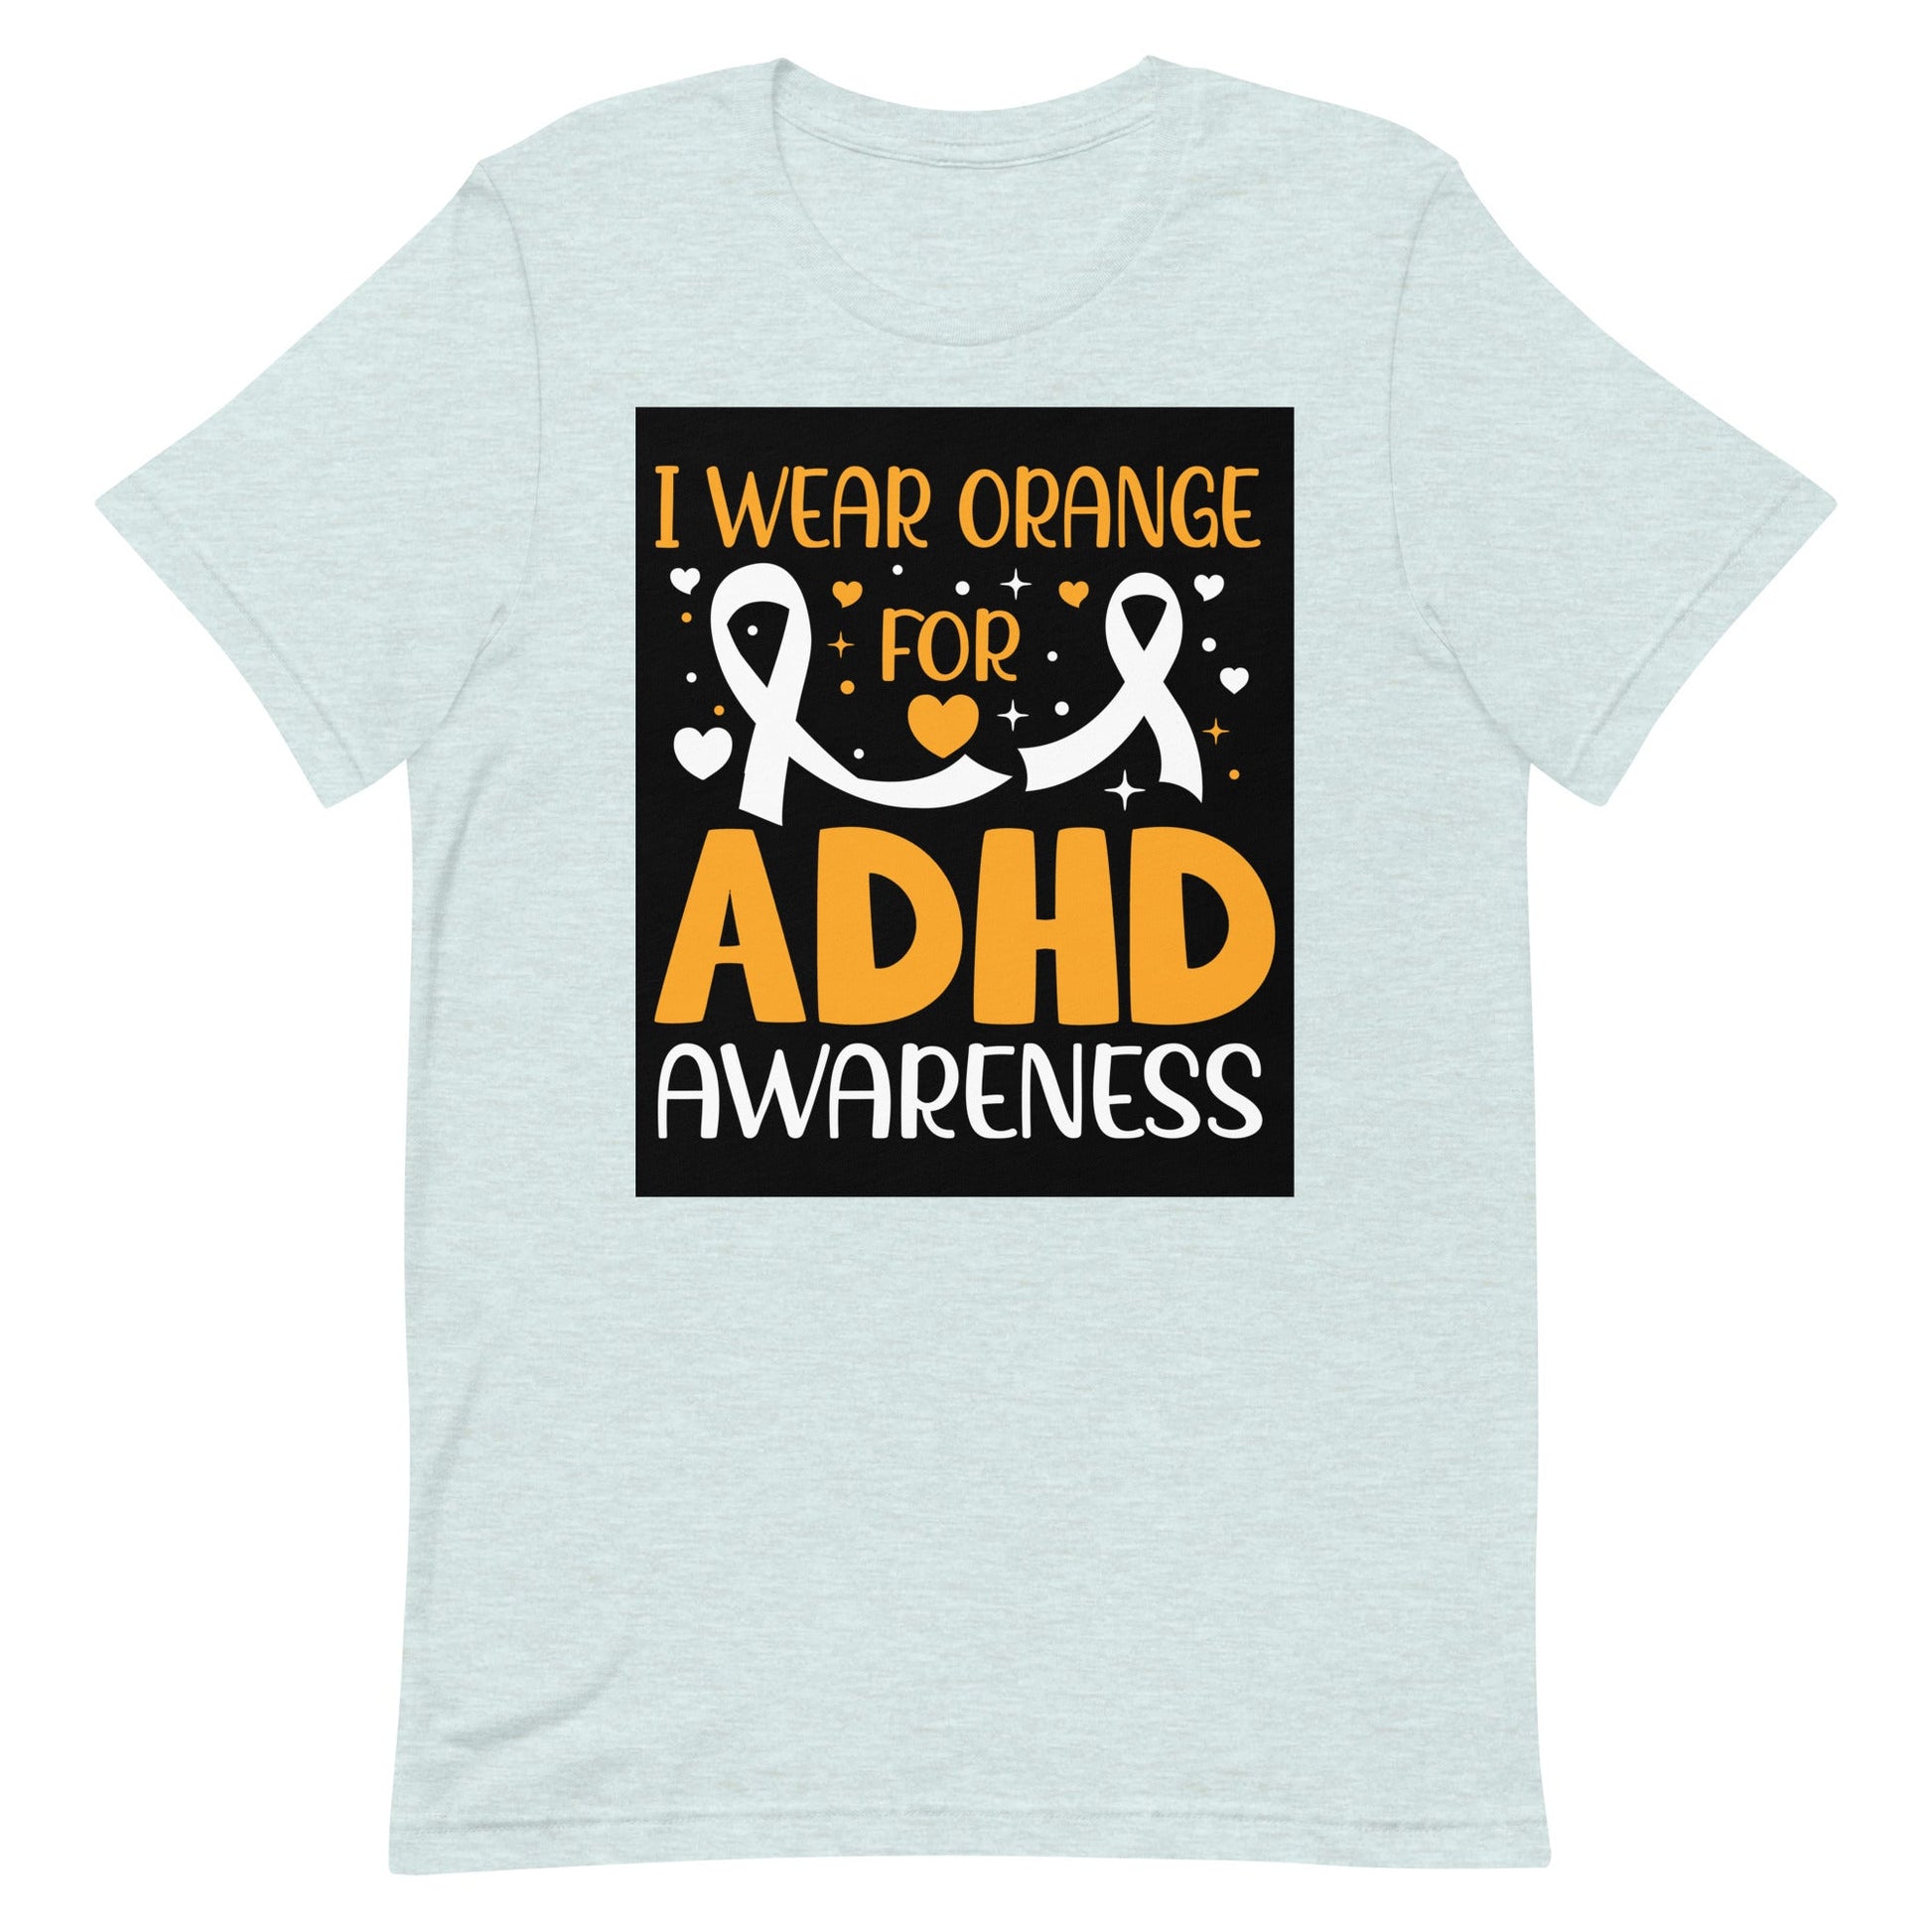 ADHD Awareness Unisex T-Shirt - Uniquely Included